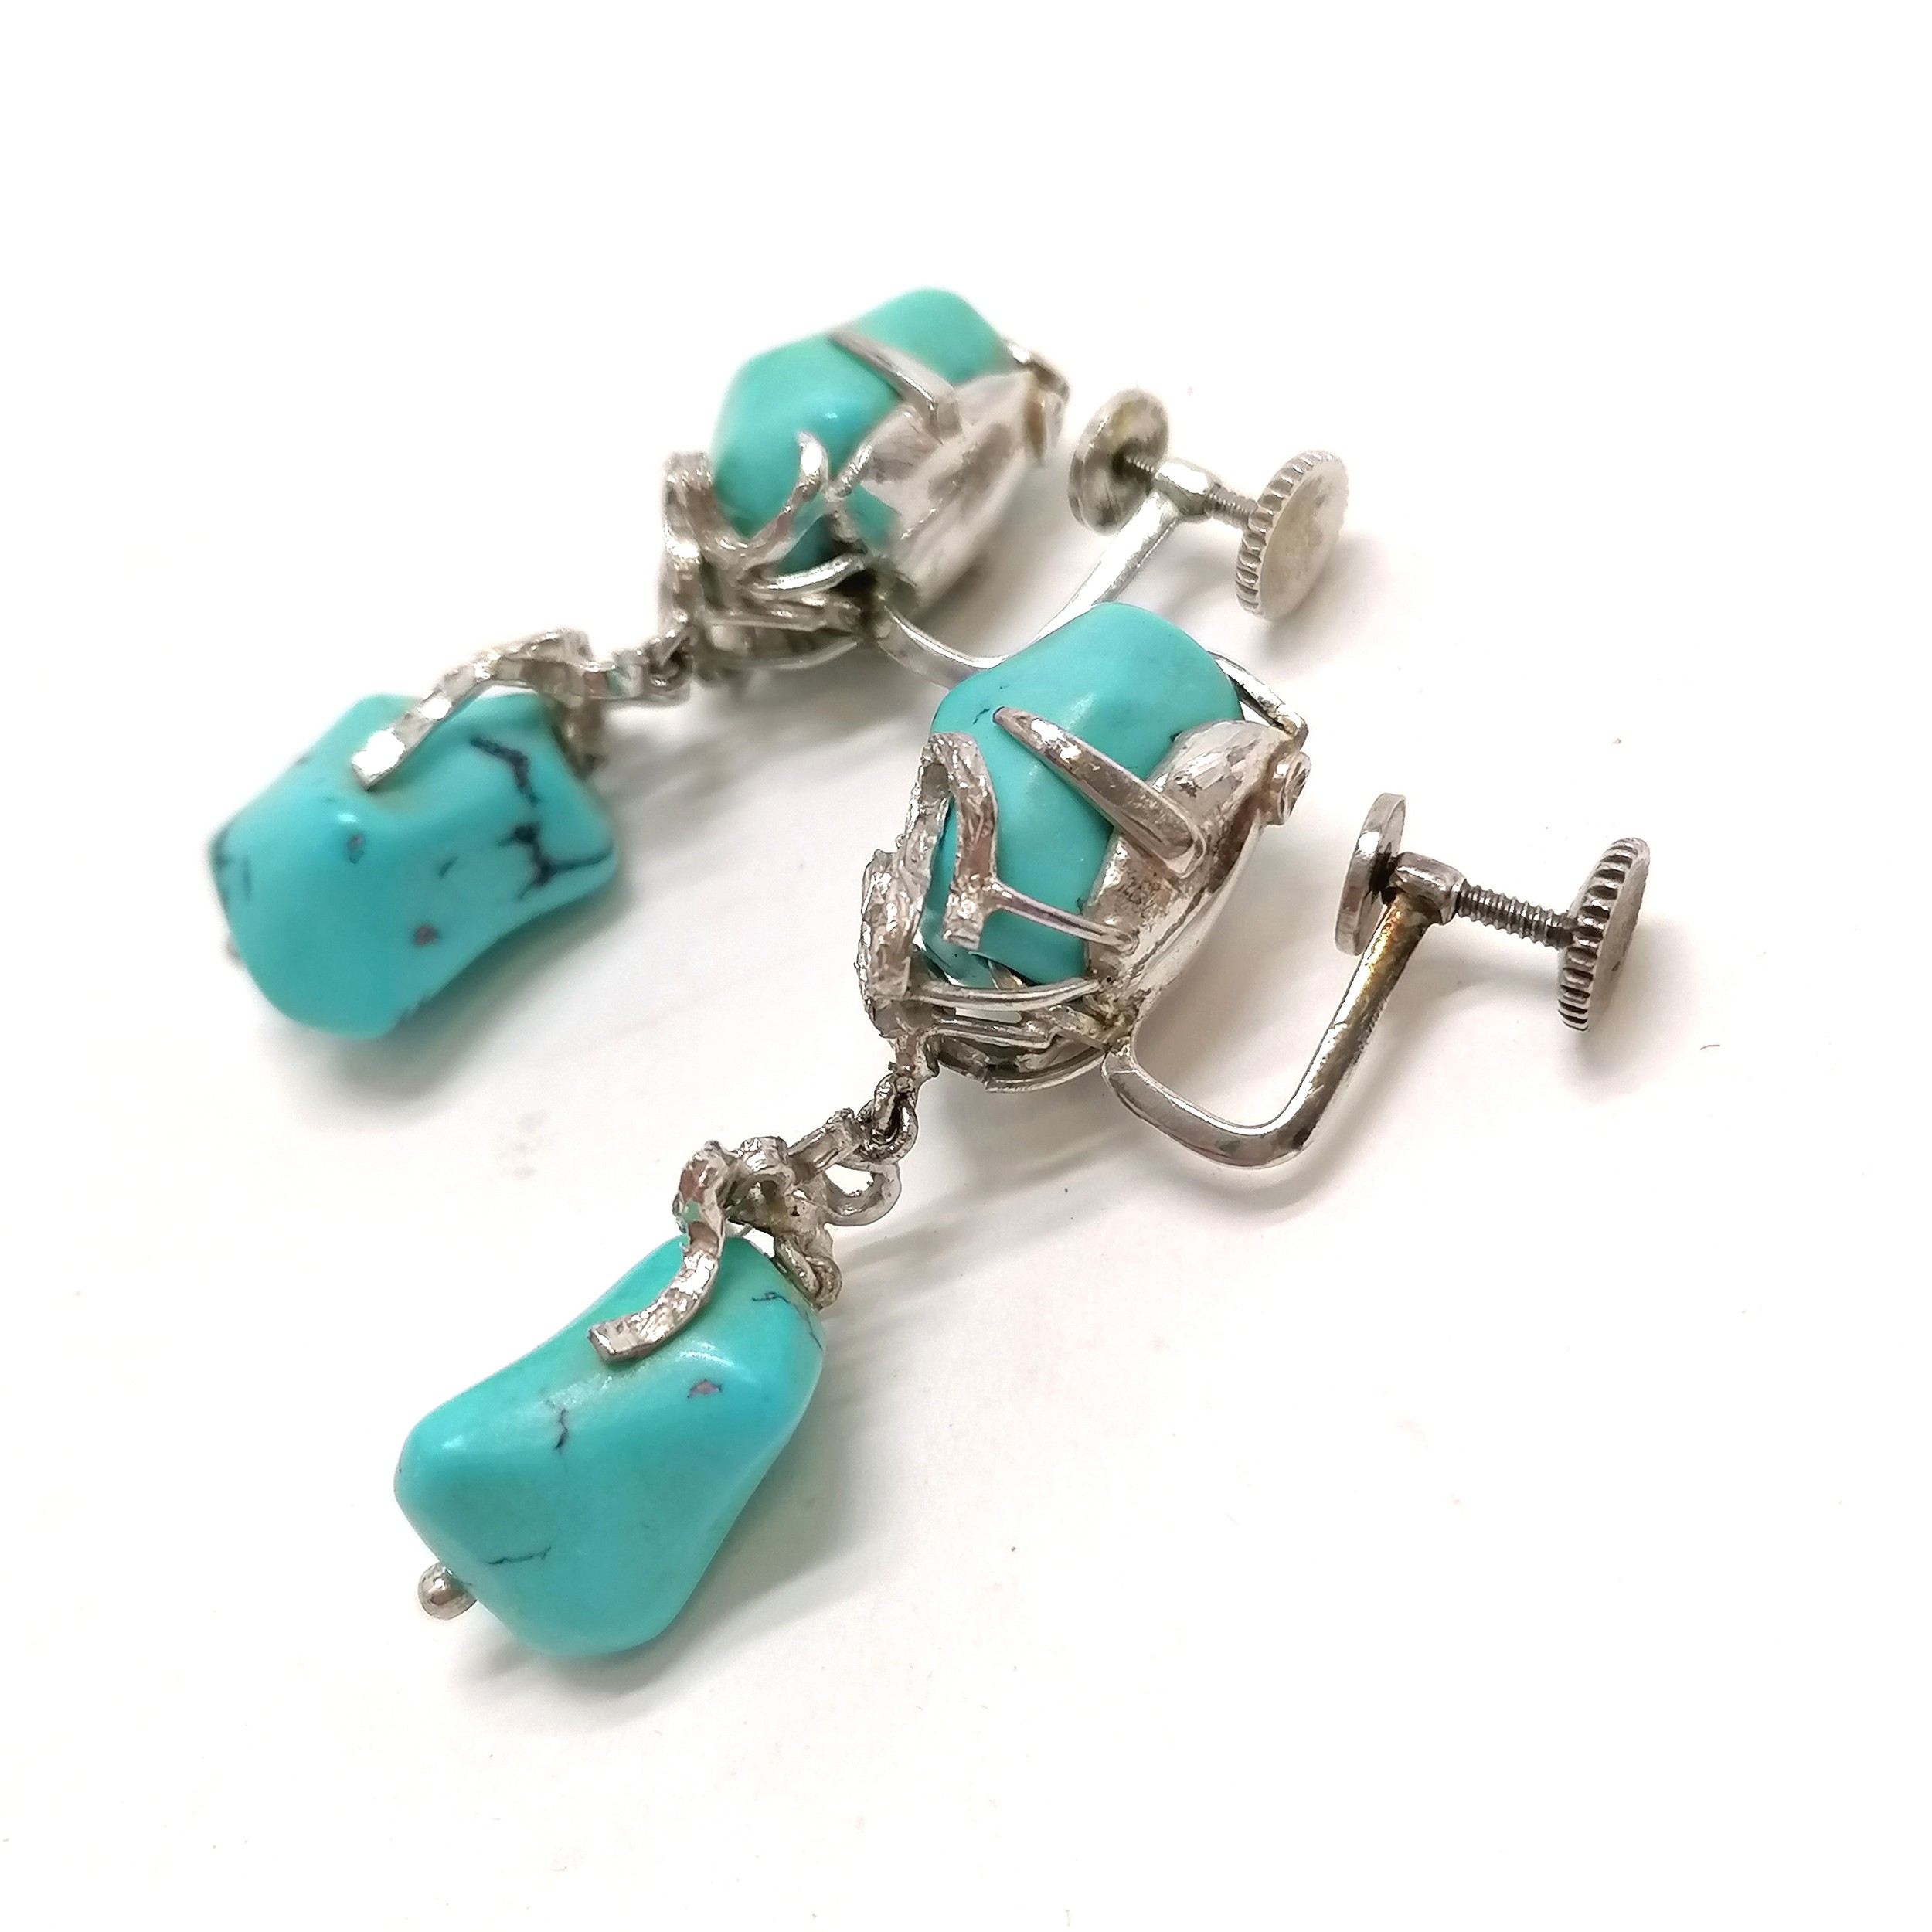 14ct marked white gold 1970's turquoise set screw back drop earrings - 4cm & 16.8g total weight - Image 3 of 3